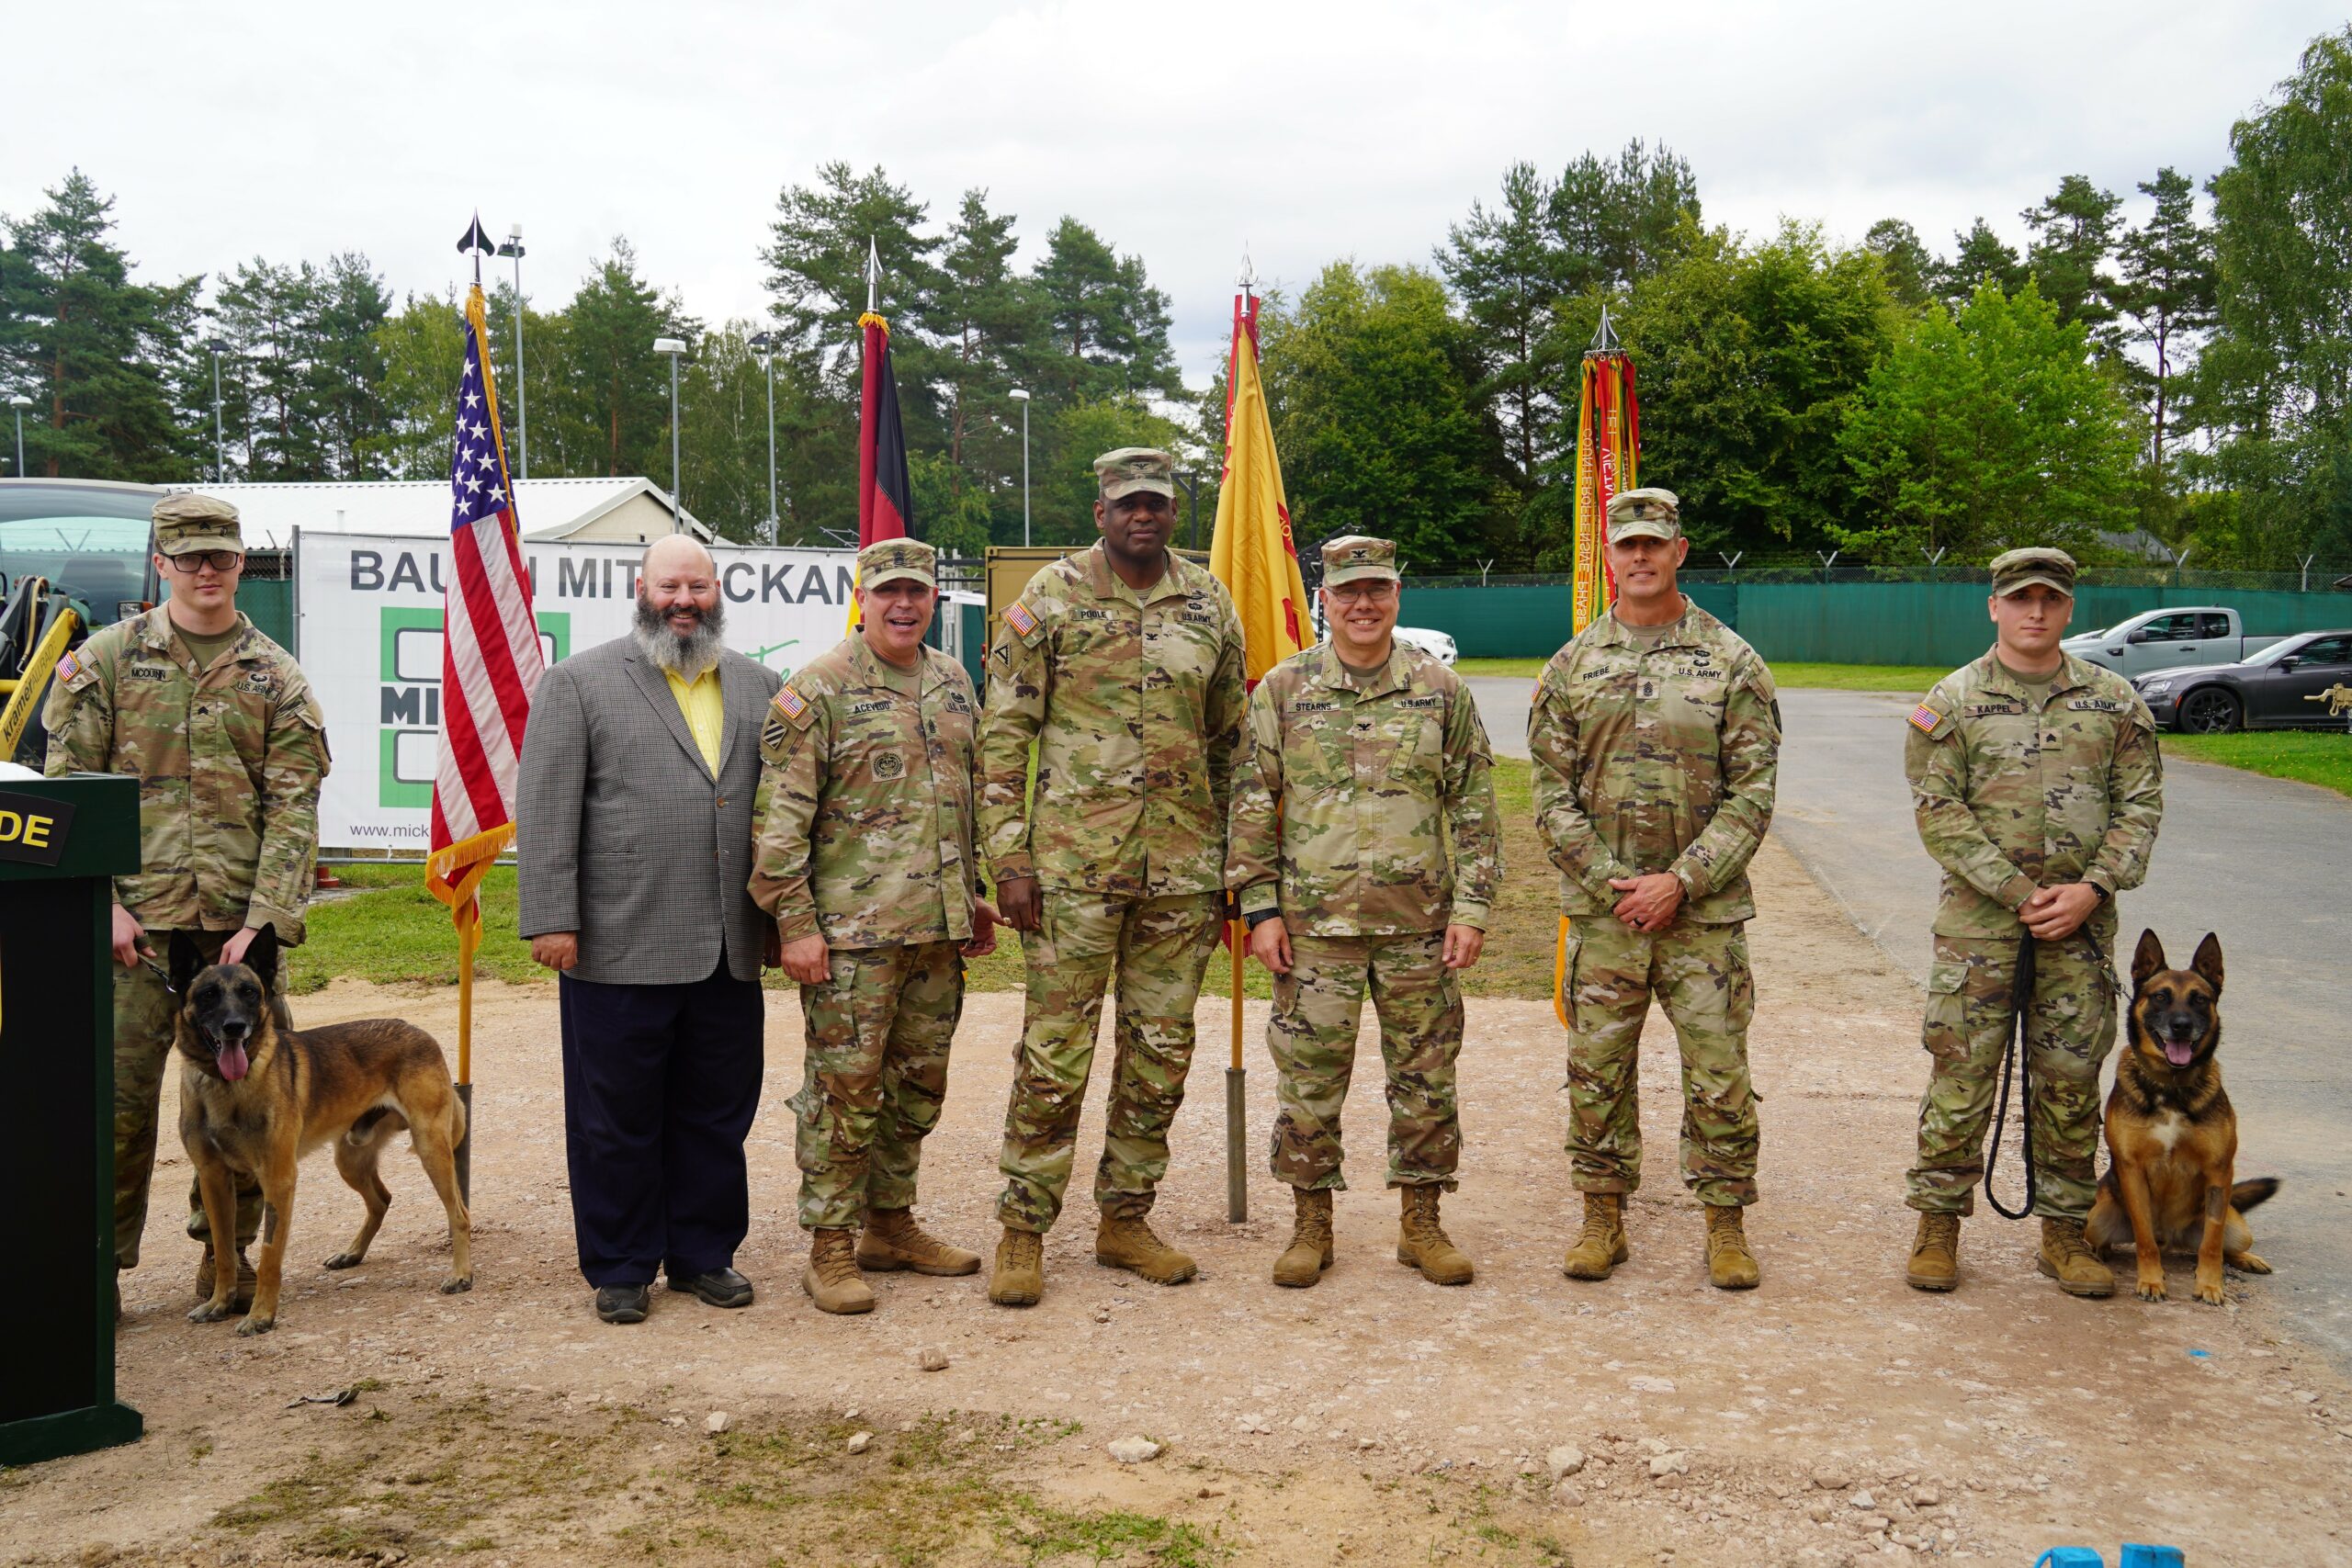 US Army Garrison Bavaria personnel with military working dogs Andy, 8, and Blus, 6.